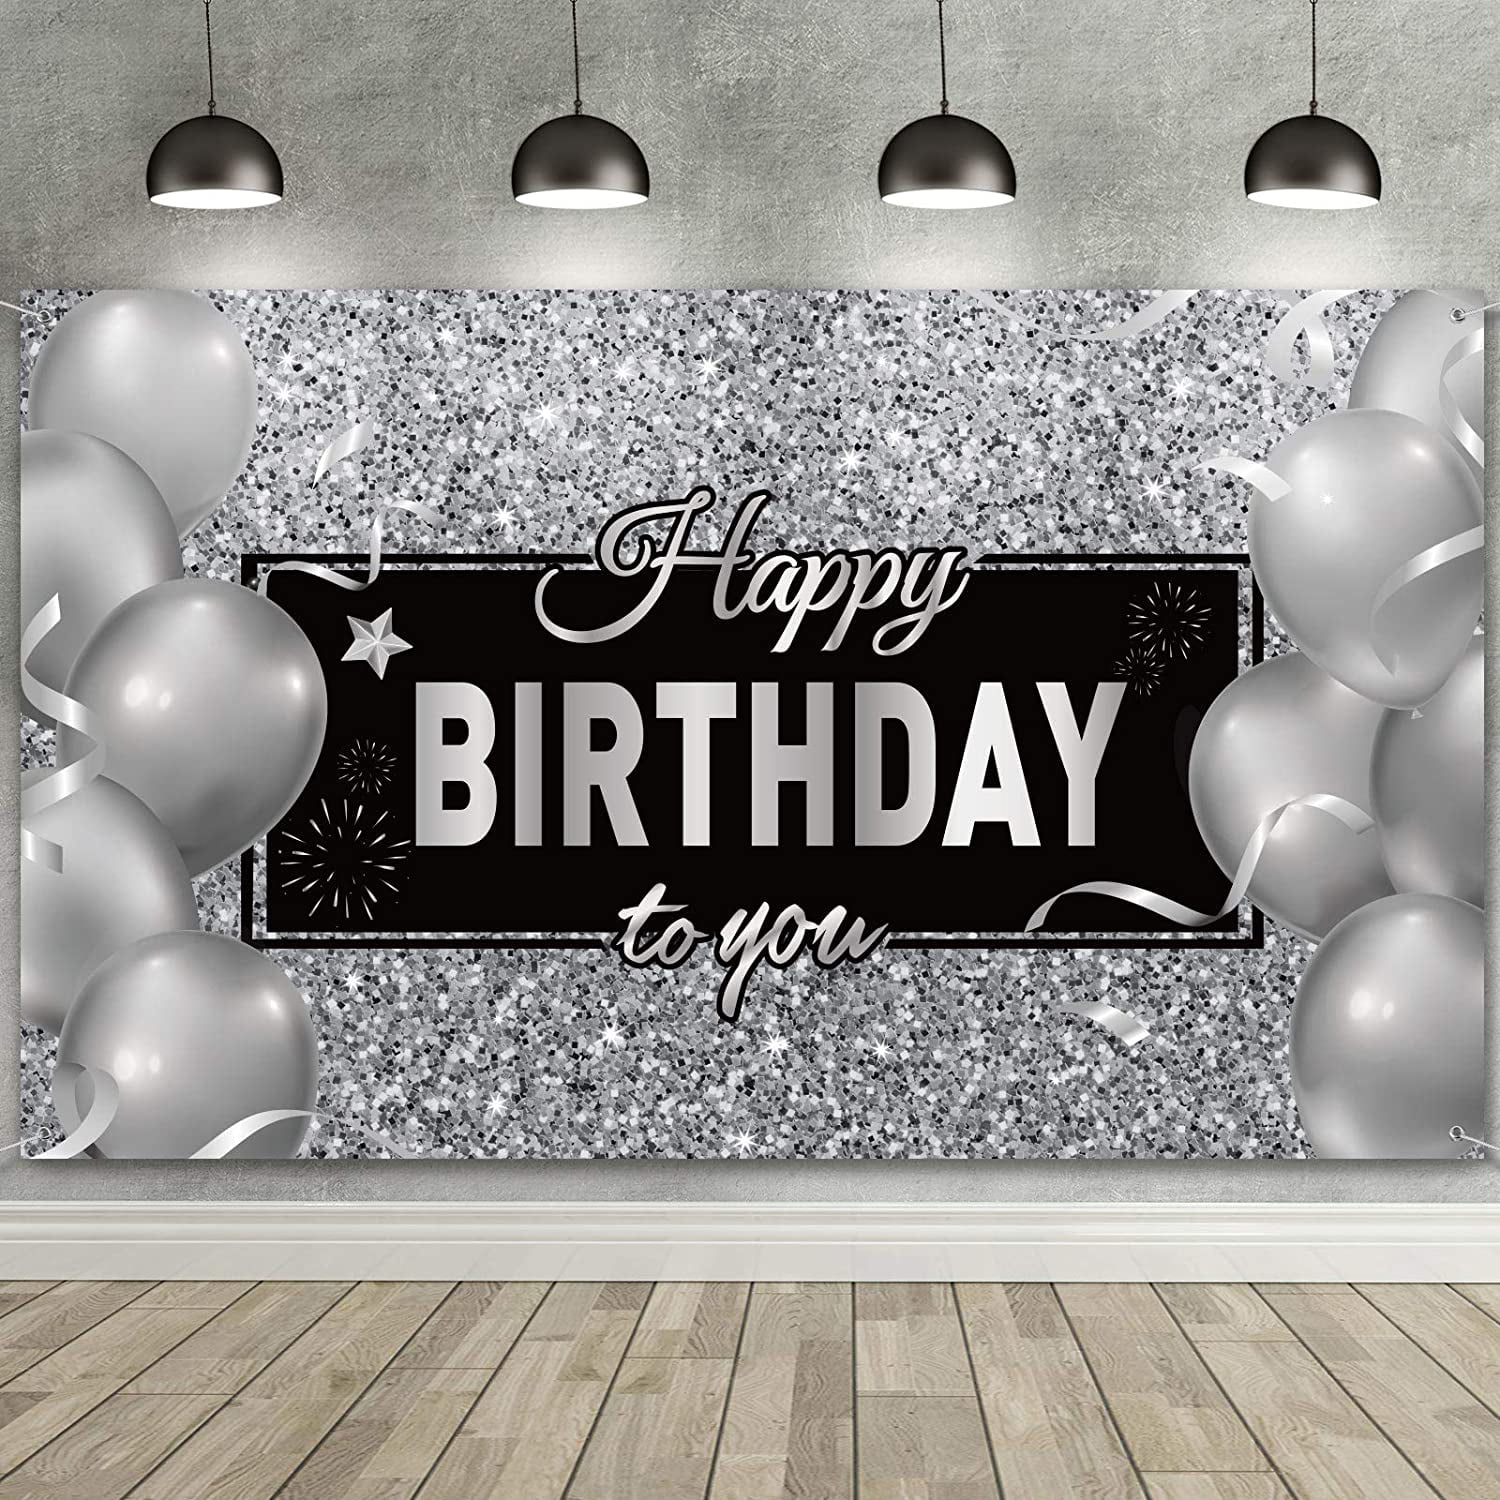 72.8 x 43.3 inch Extra Large Fabric Blue 16th Birthday Sign Poster Photography Background Banner with Balloon for 16th Birthday Anniversary Party Decor Supplies Sweet 16th Birthday Backdrop Banner 